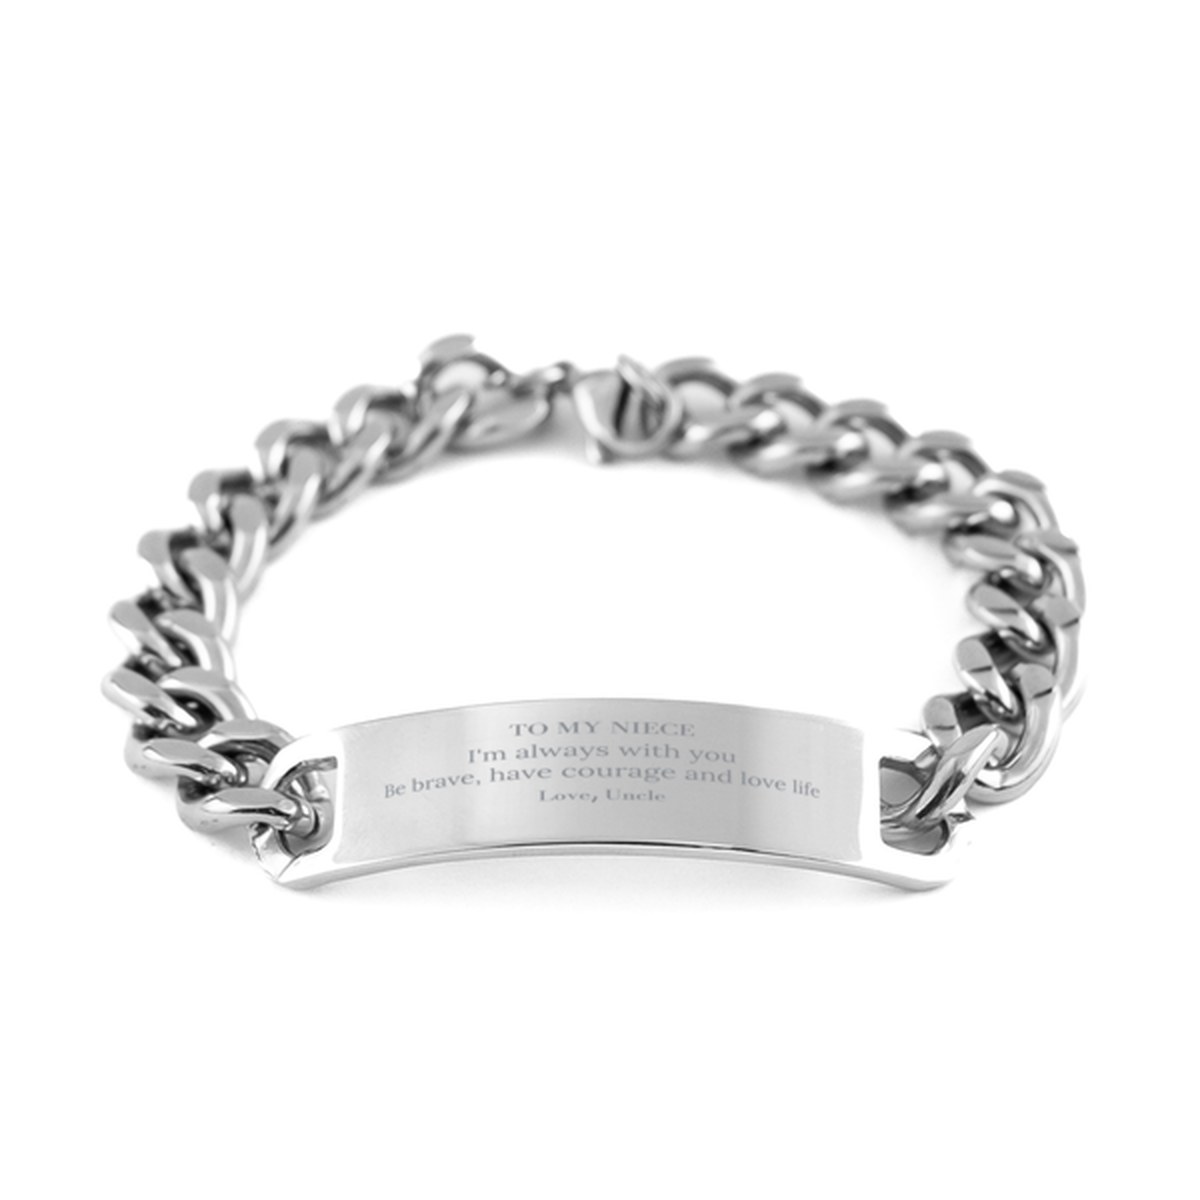 To My Niece Gifts from Uncle, Unique Cuban Chain Stainless Steel Bracelet Inspirational Christmas Birthday Graduation Gifts for Niece I'm always with you. Be brave, have courage and love life. Love, Uncle